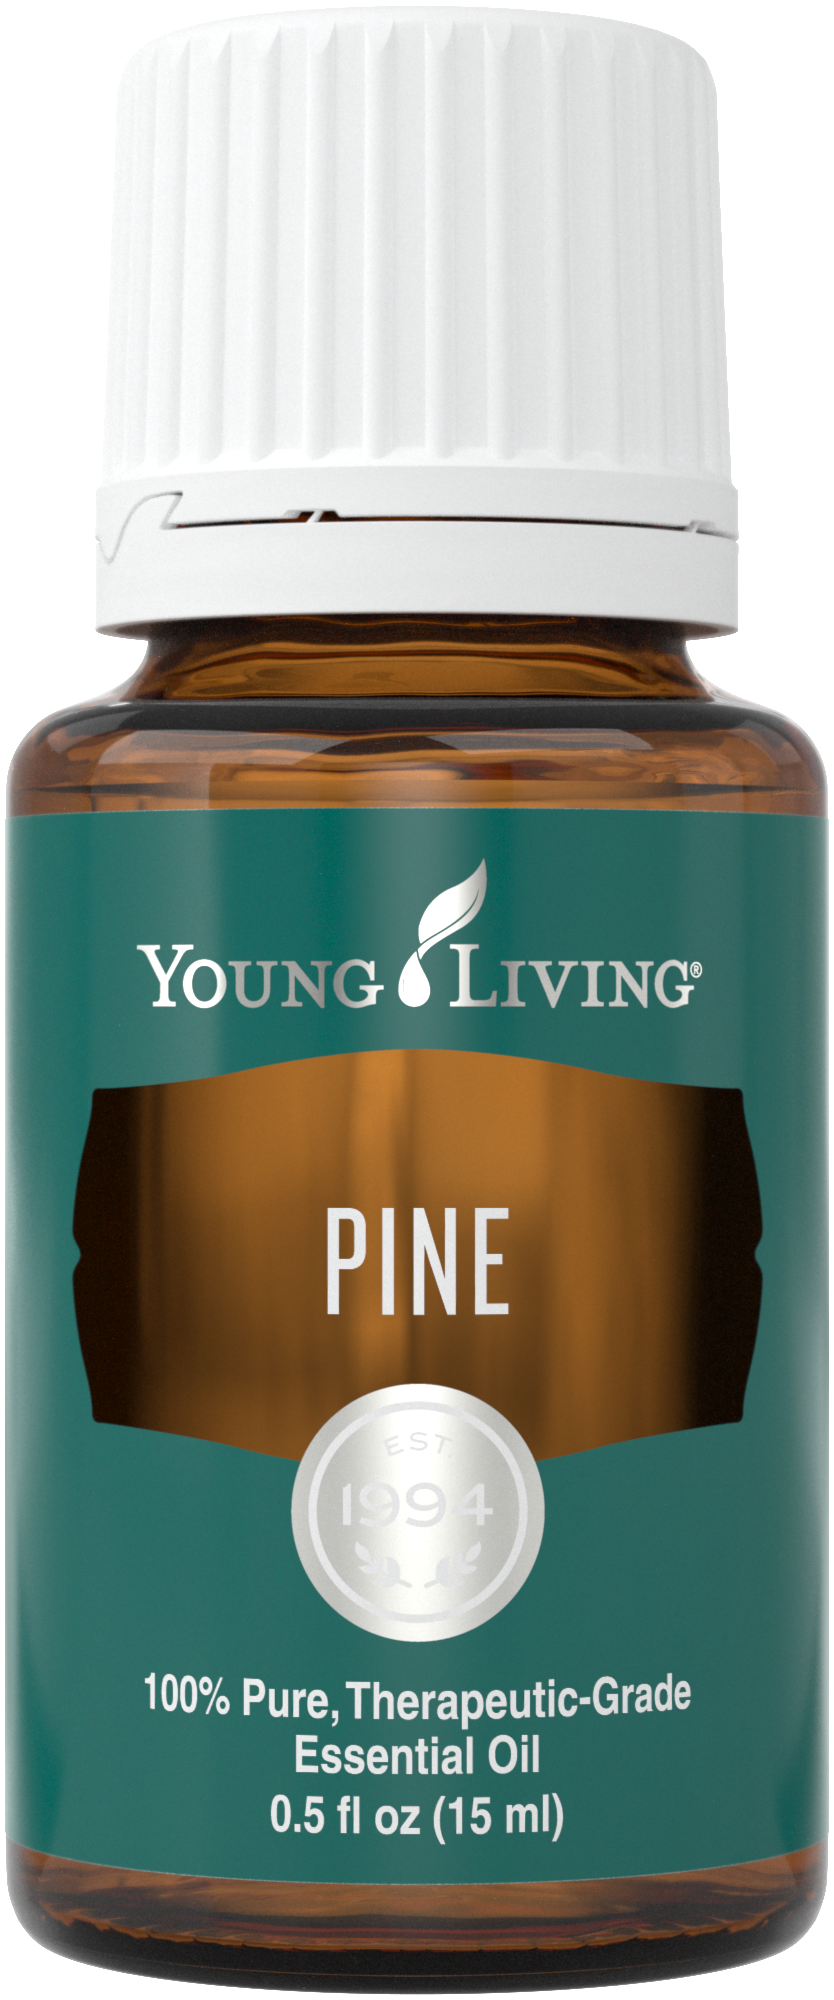 Bottle of Pine Essential Oil